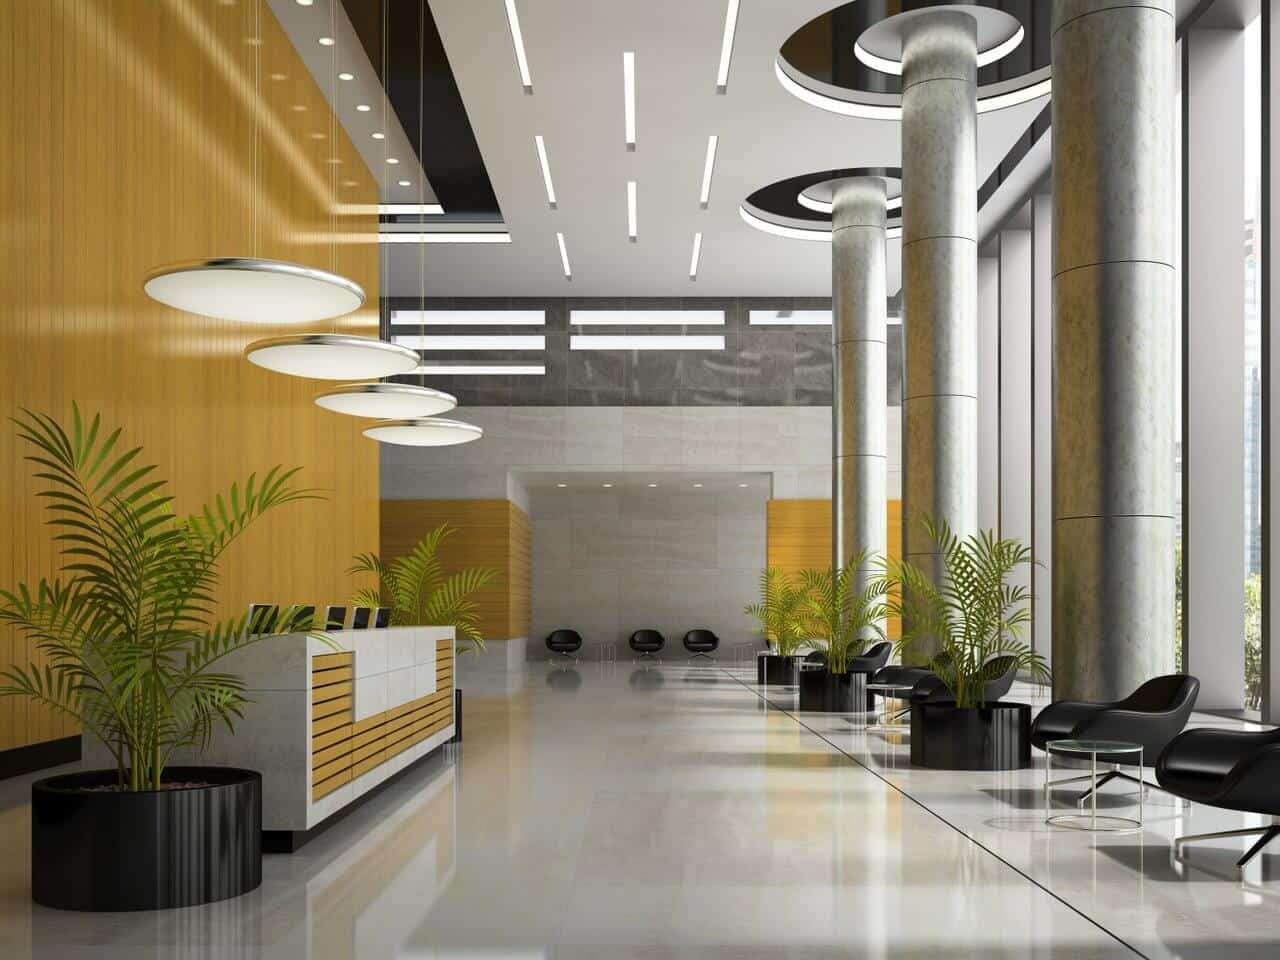 Eliminate points of confusion in office reception layout